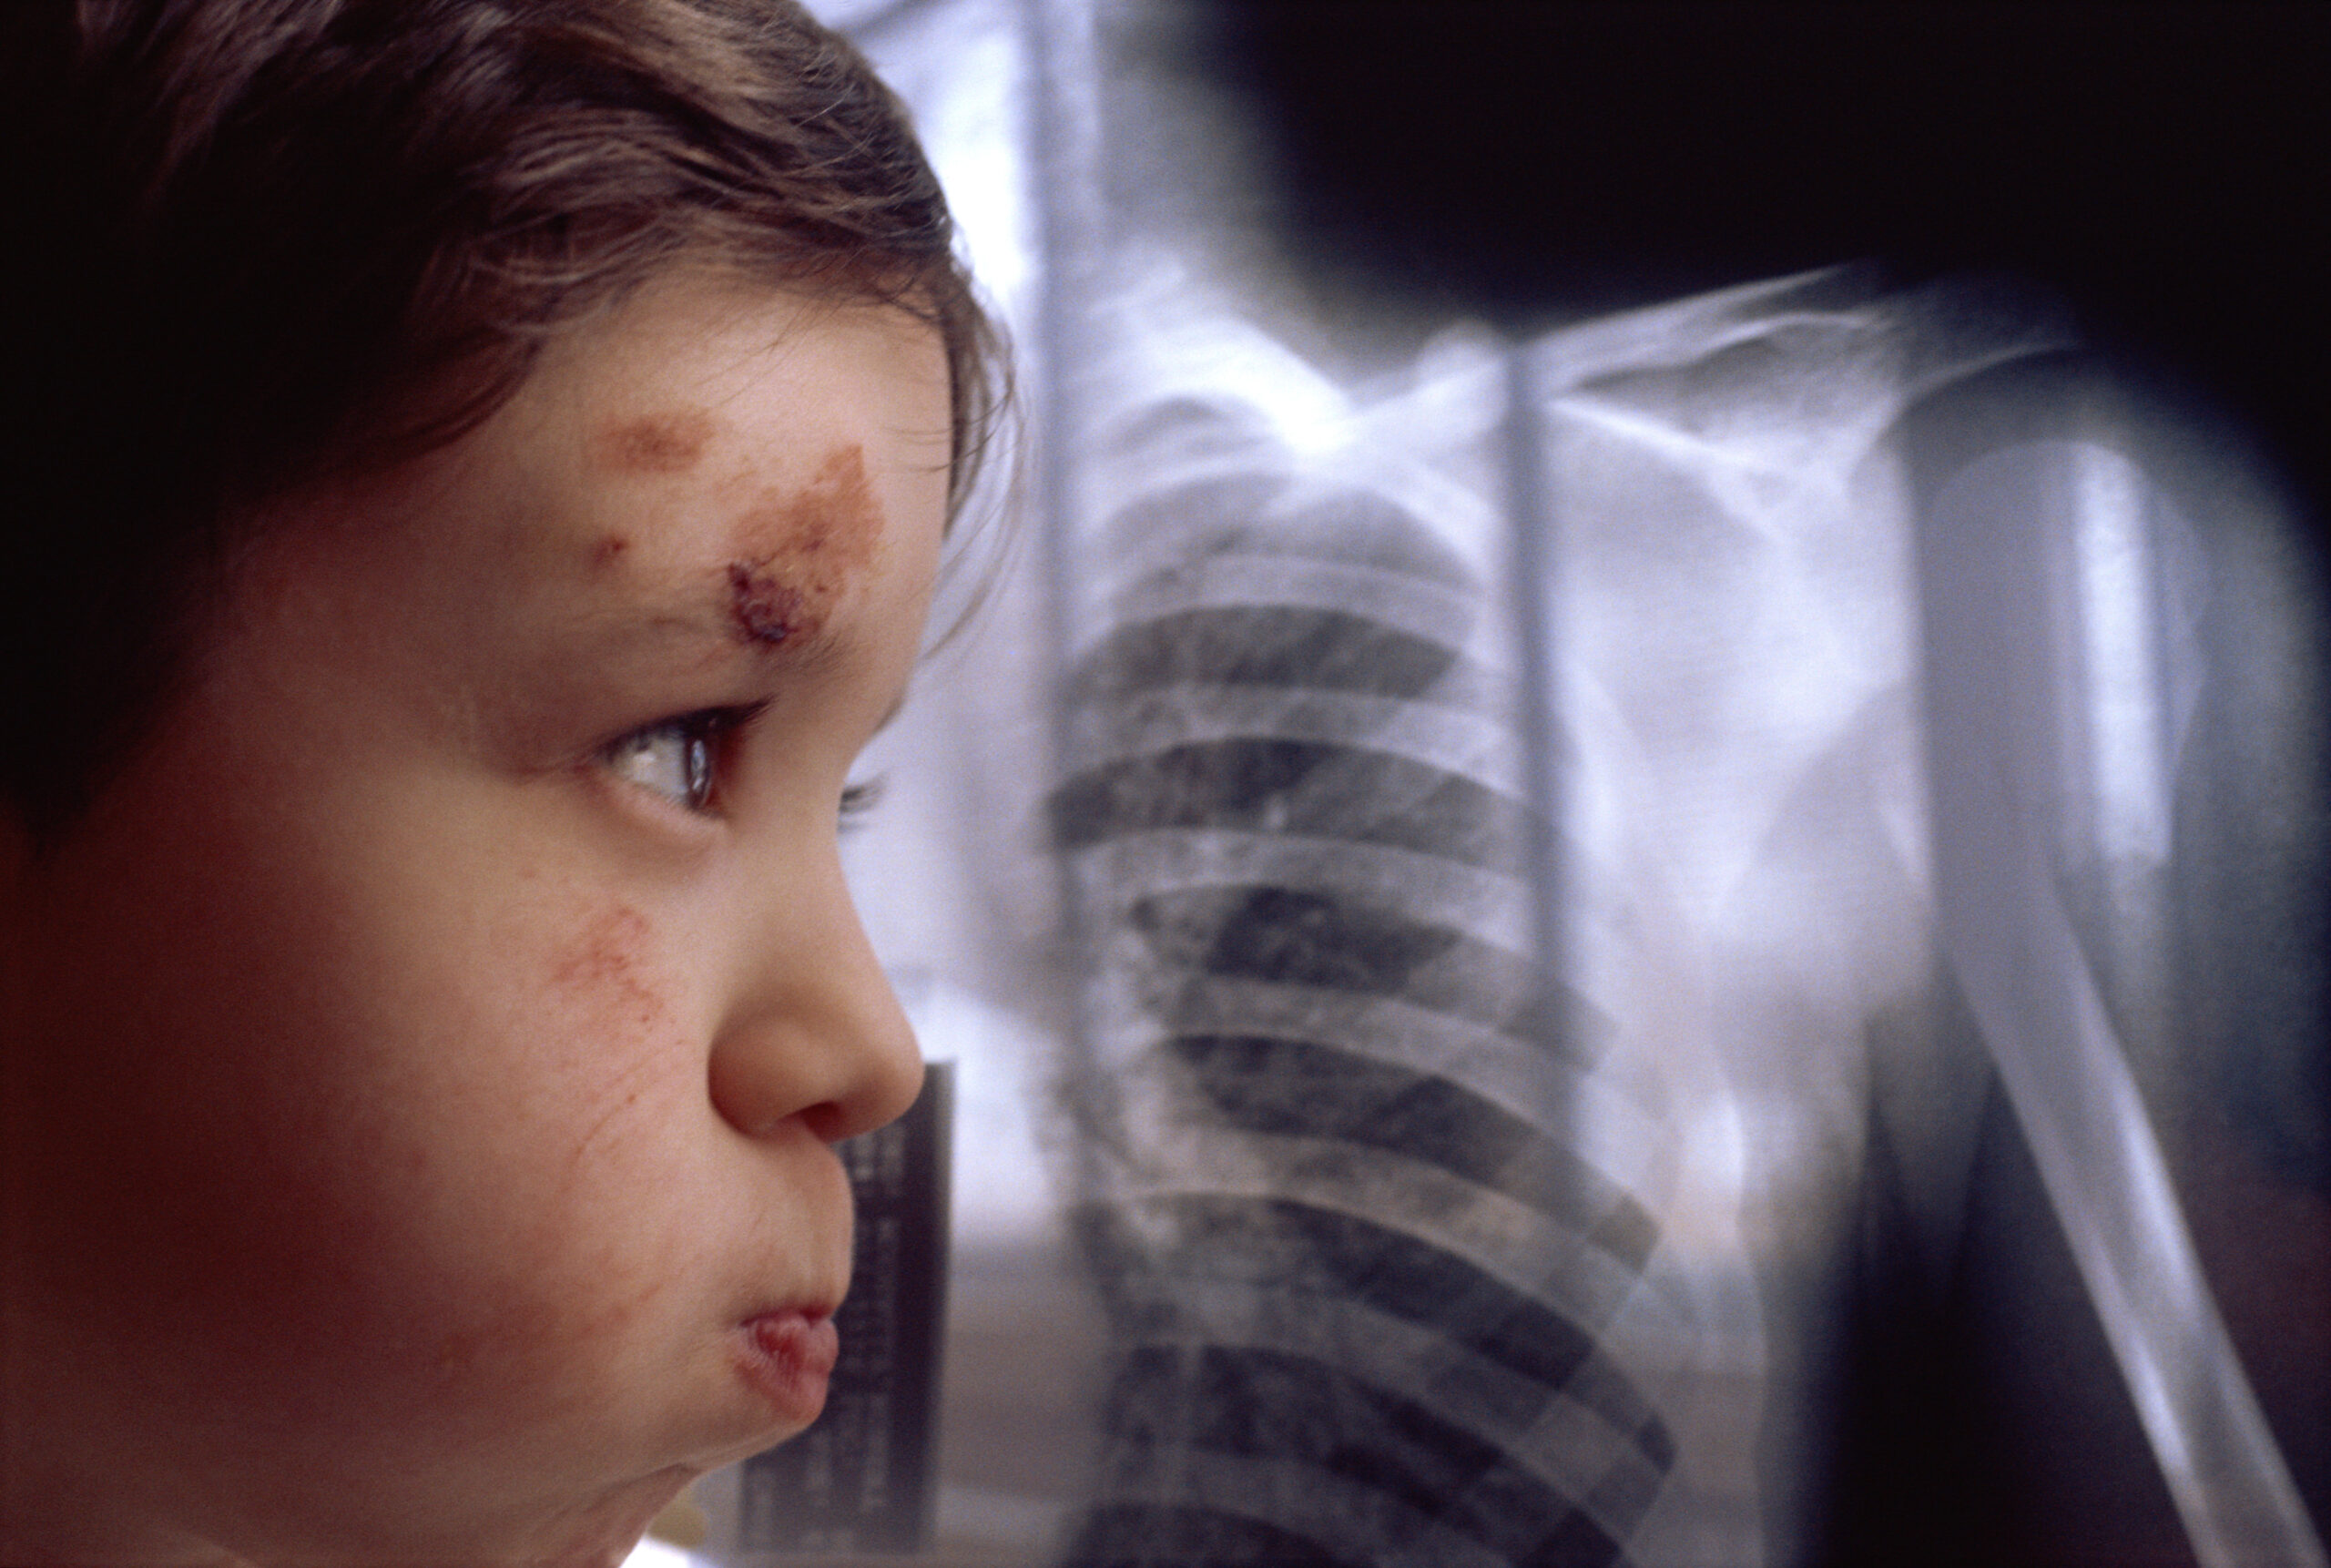 Abused Child with X-Rays